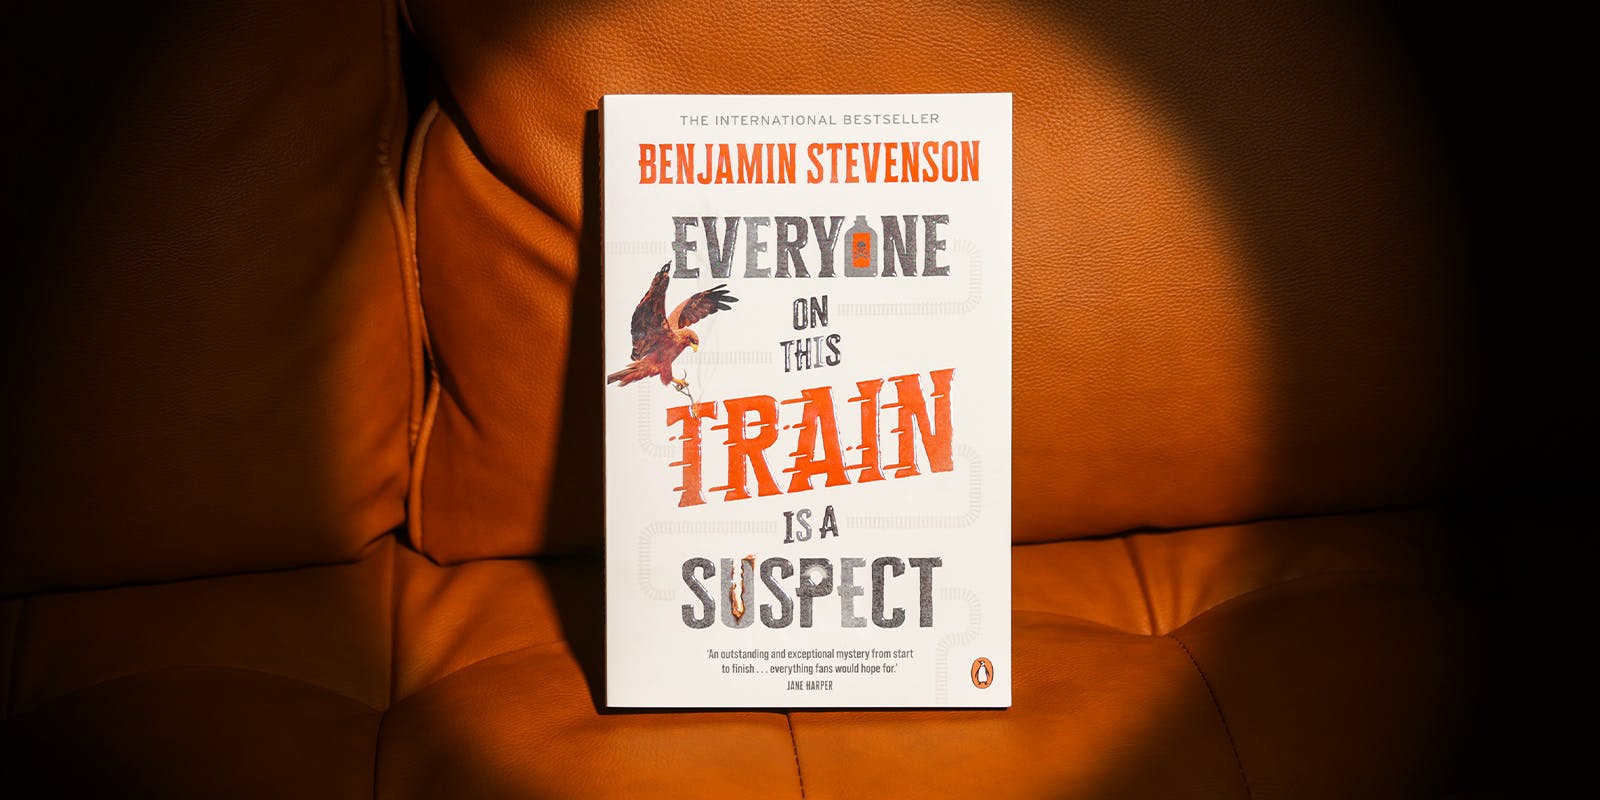 Benjamin Stevenson shares how the authors in his new novel differ from real-life Australian crime authors